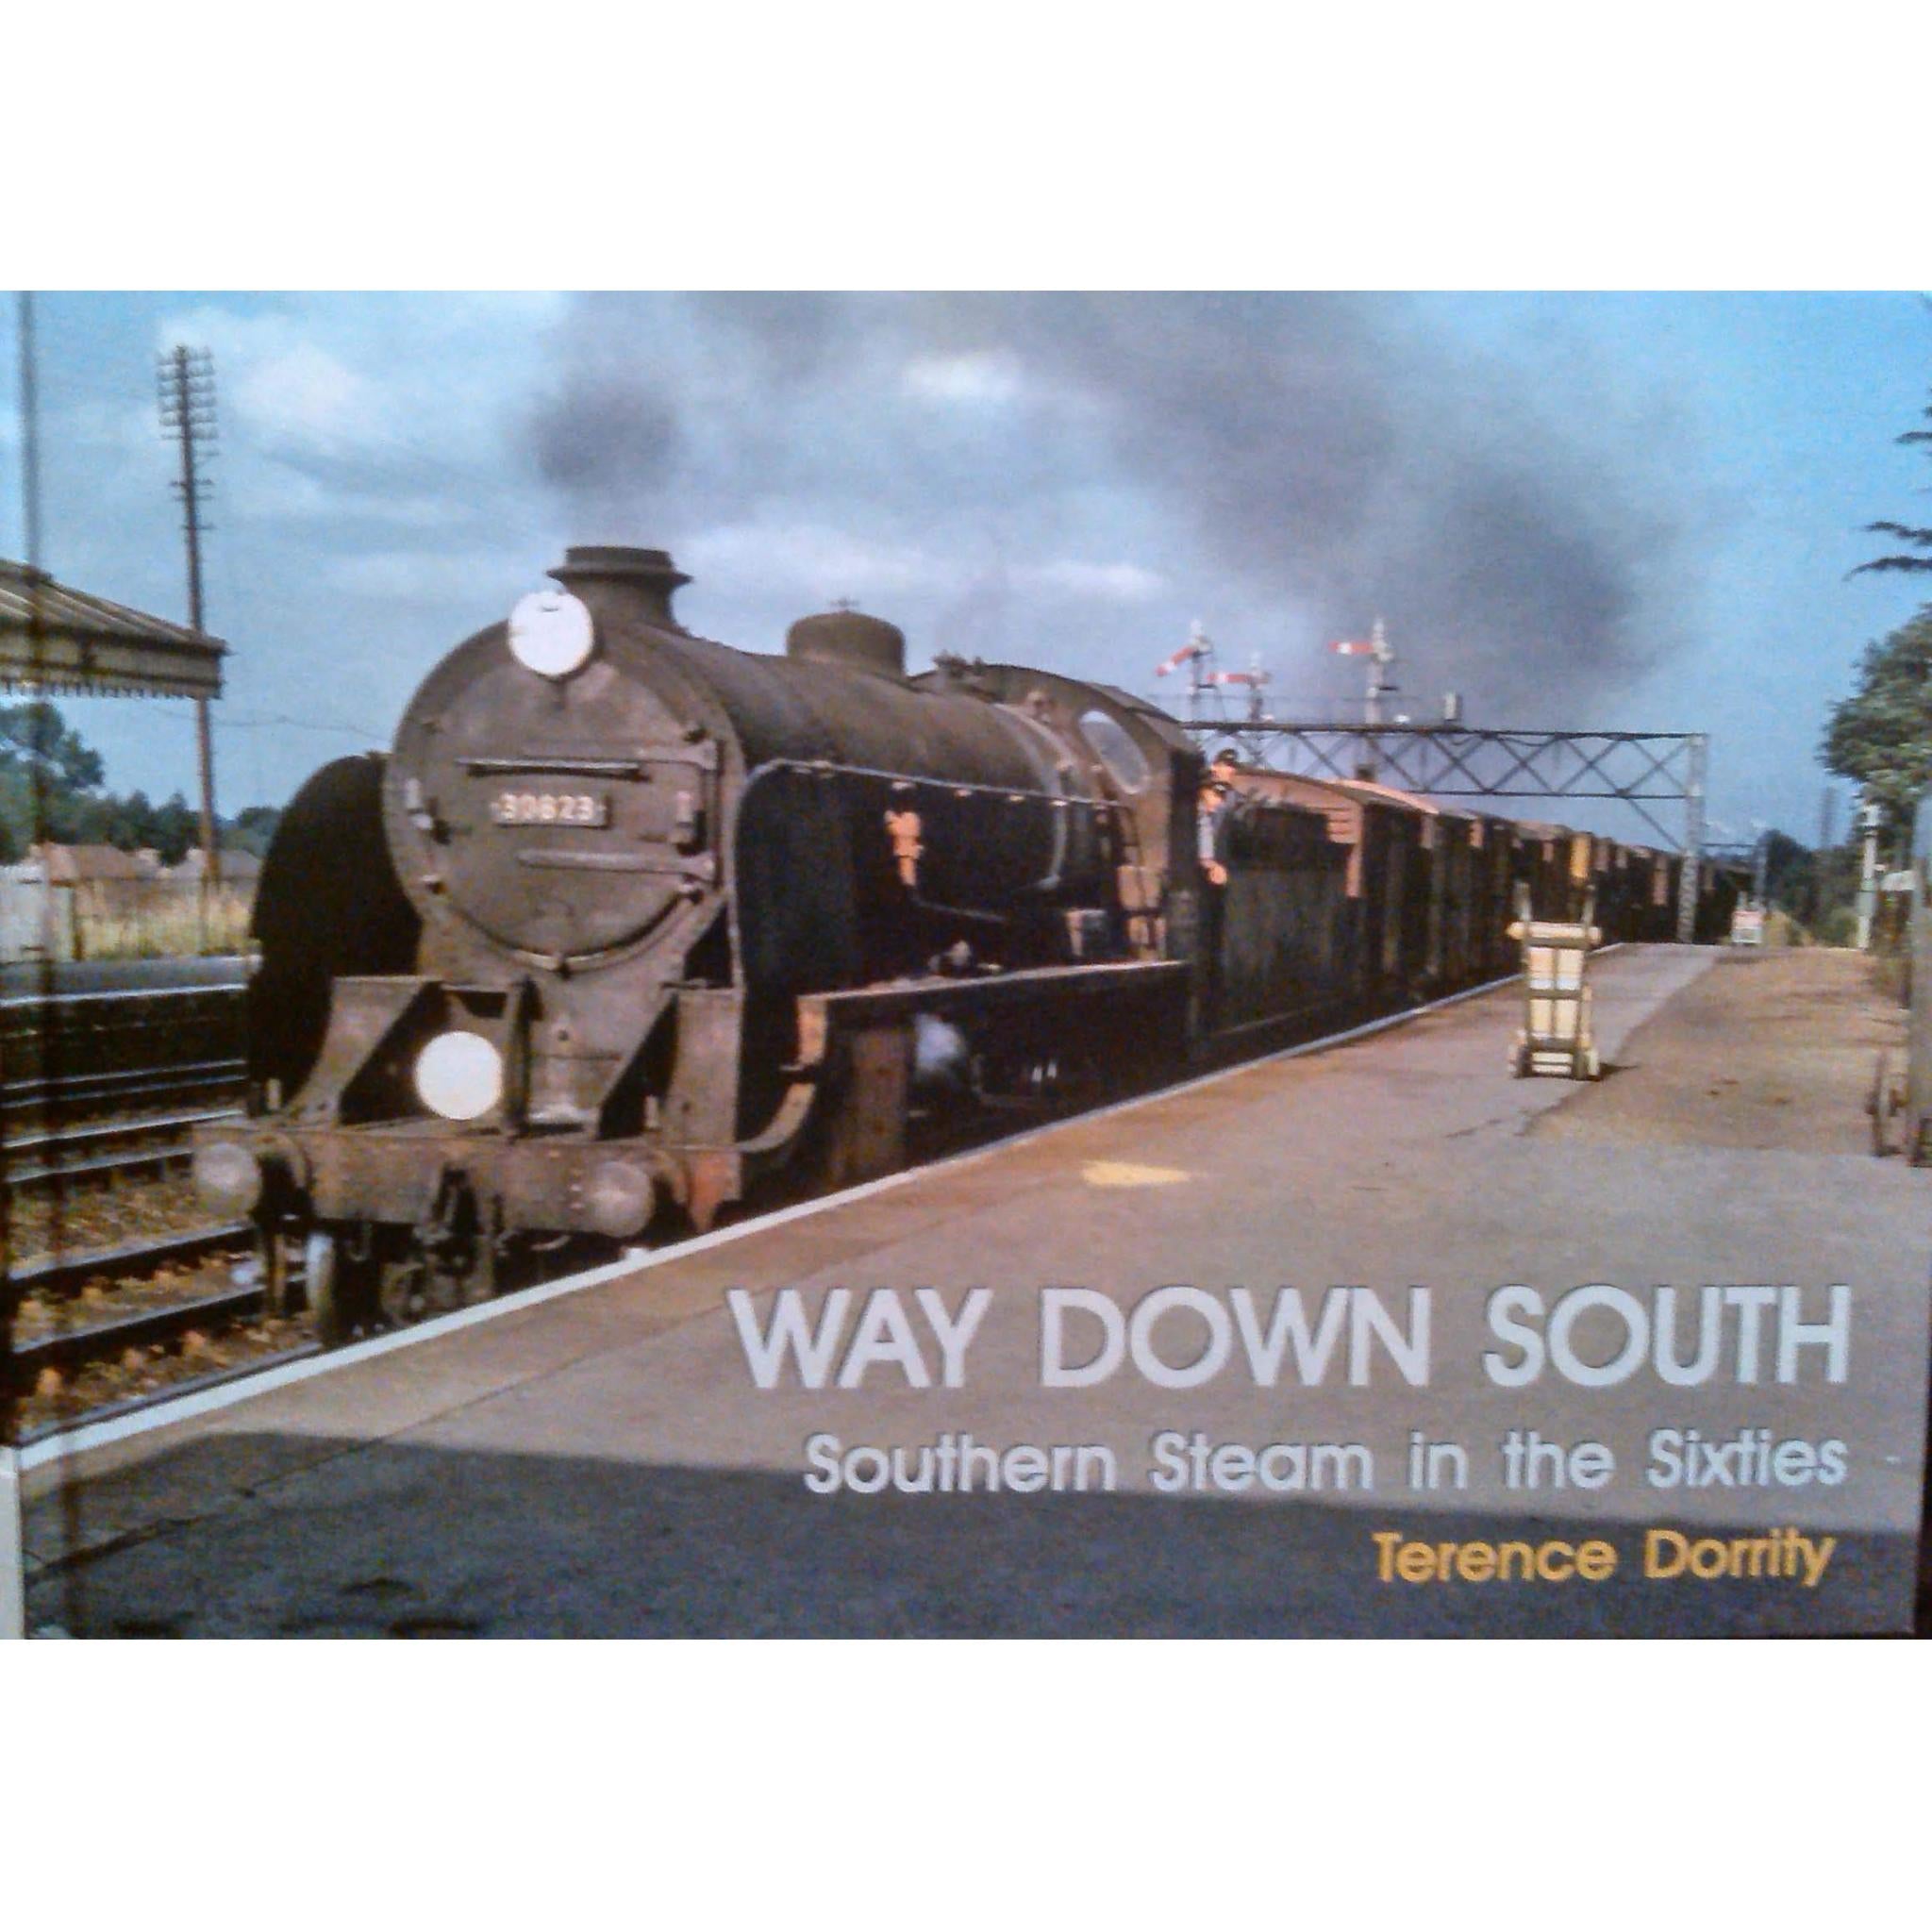 SAVE 20% this week only Way Down South - Southern Steam in the Sixties